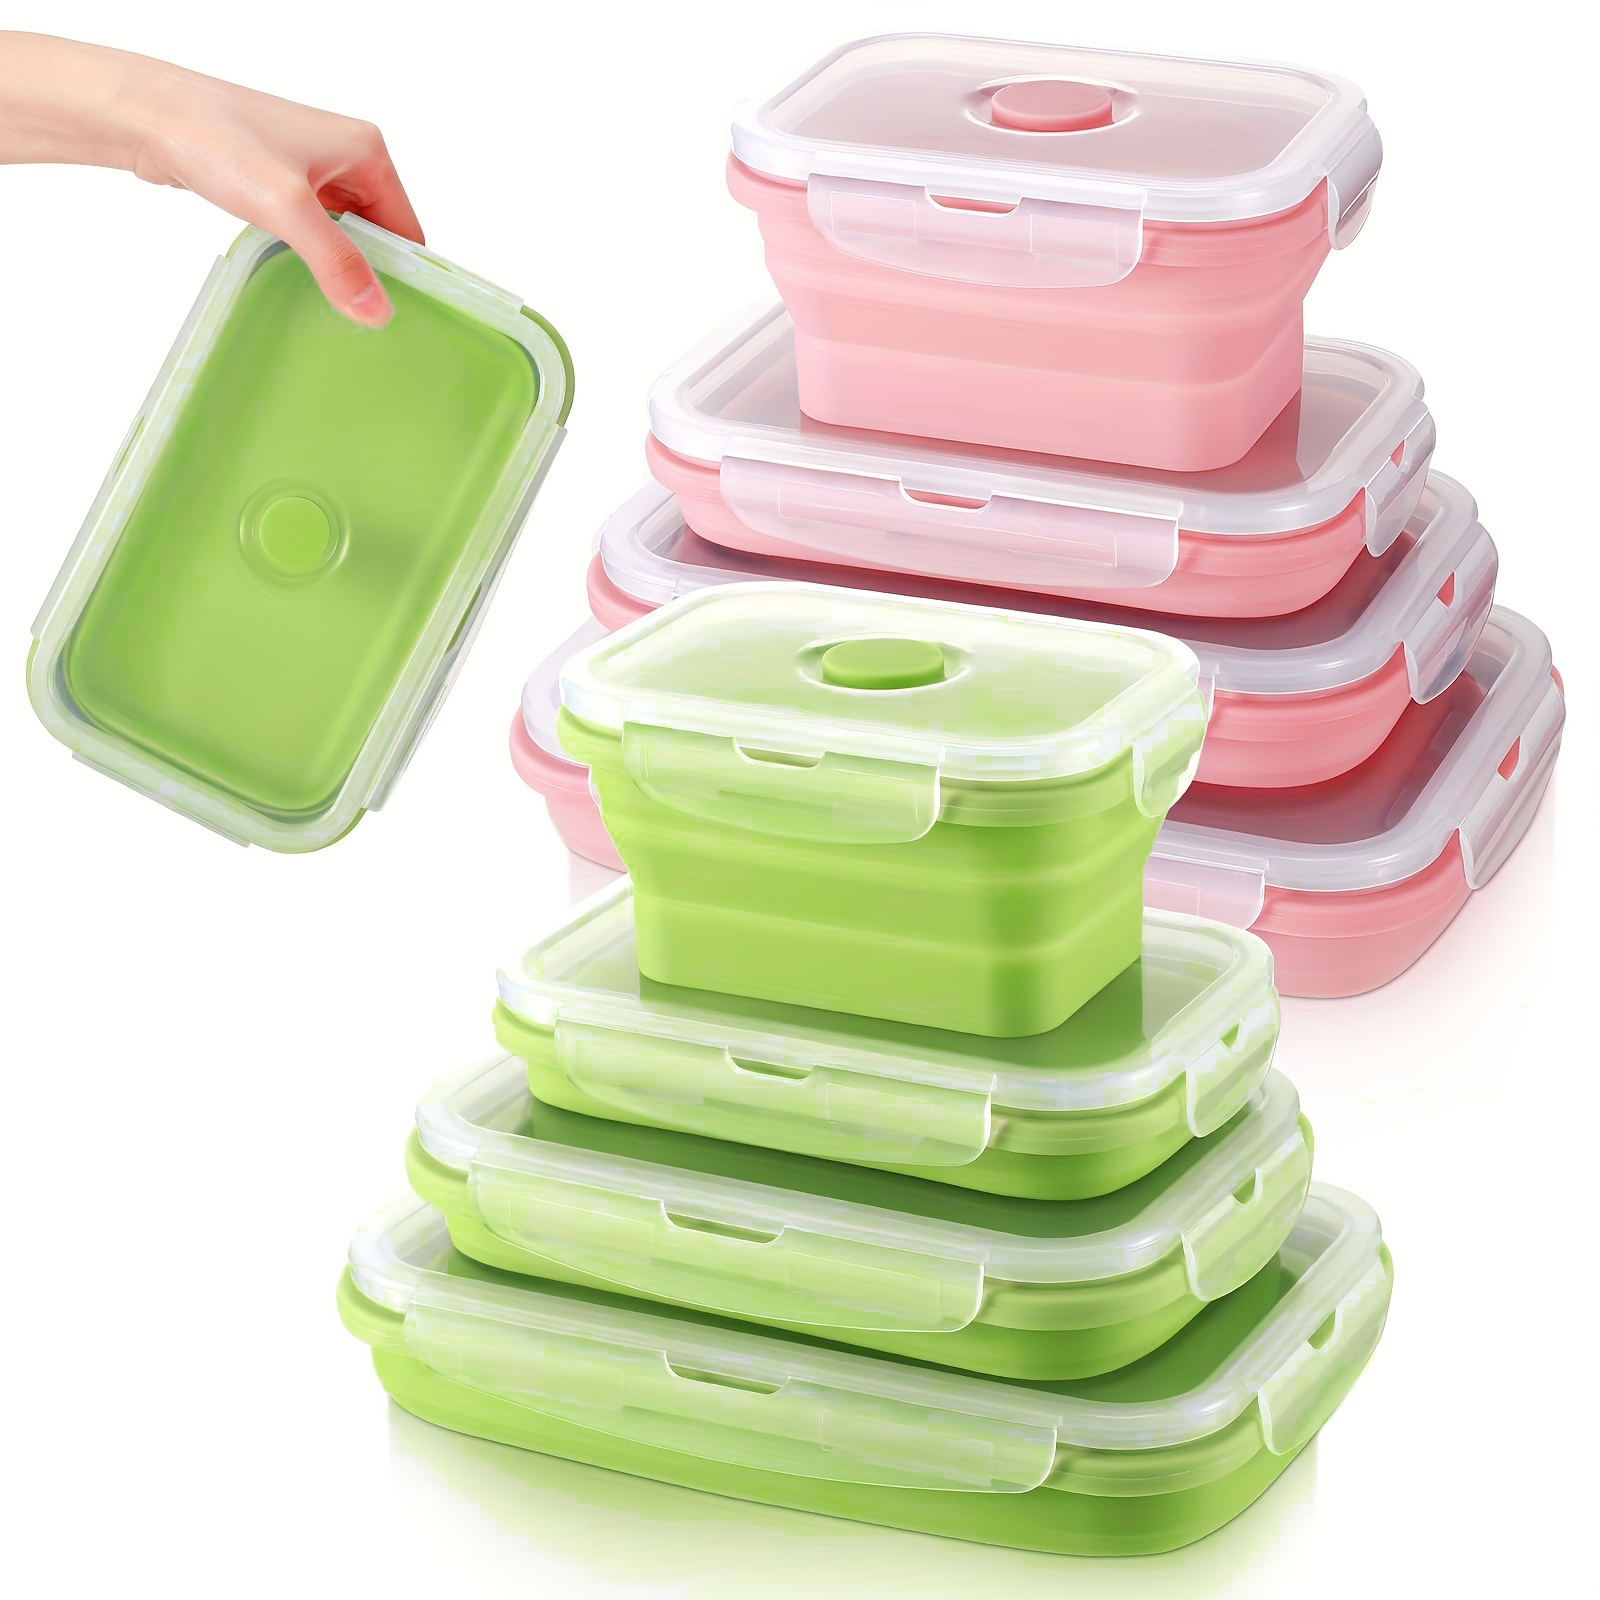 1 PCS Pizza Leftover Storage Container Pizza Organizer Box Save Space  Reusable Pizza Slicone Storage Container Red - AliExpress